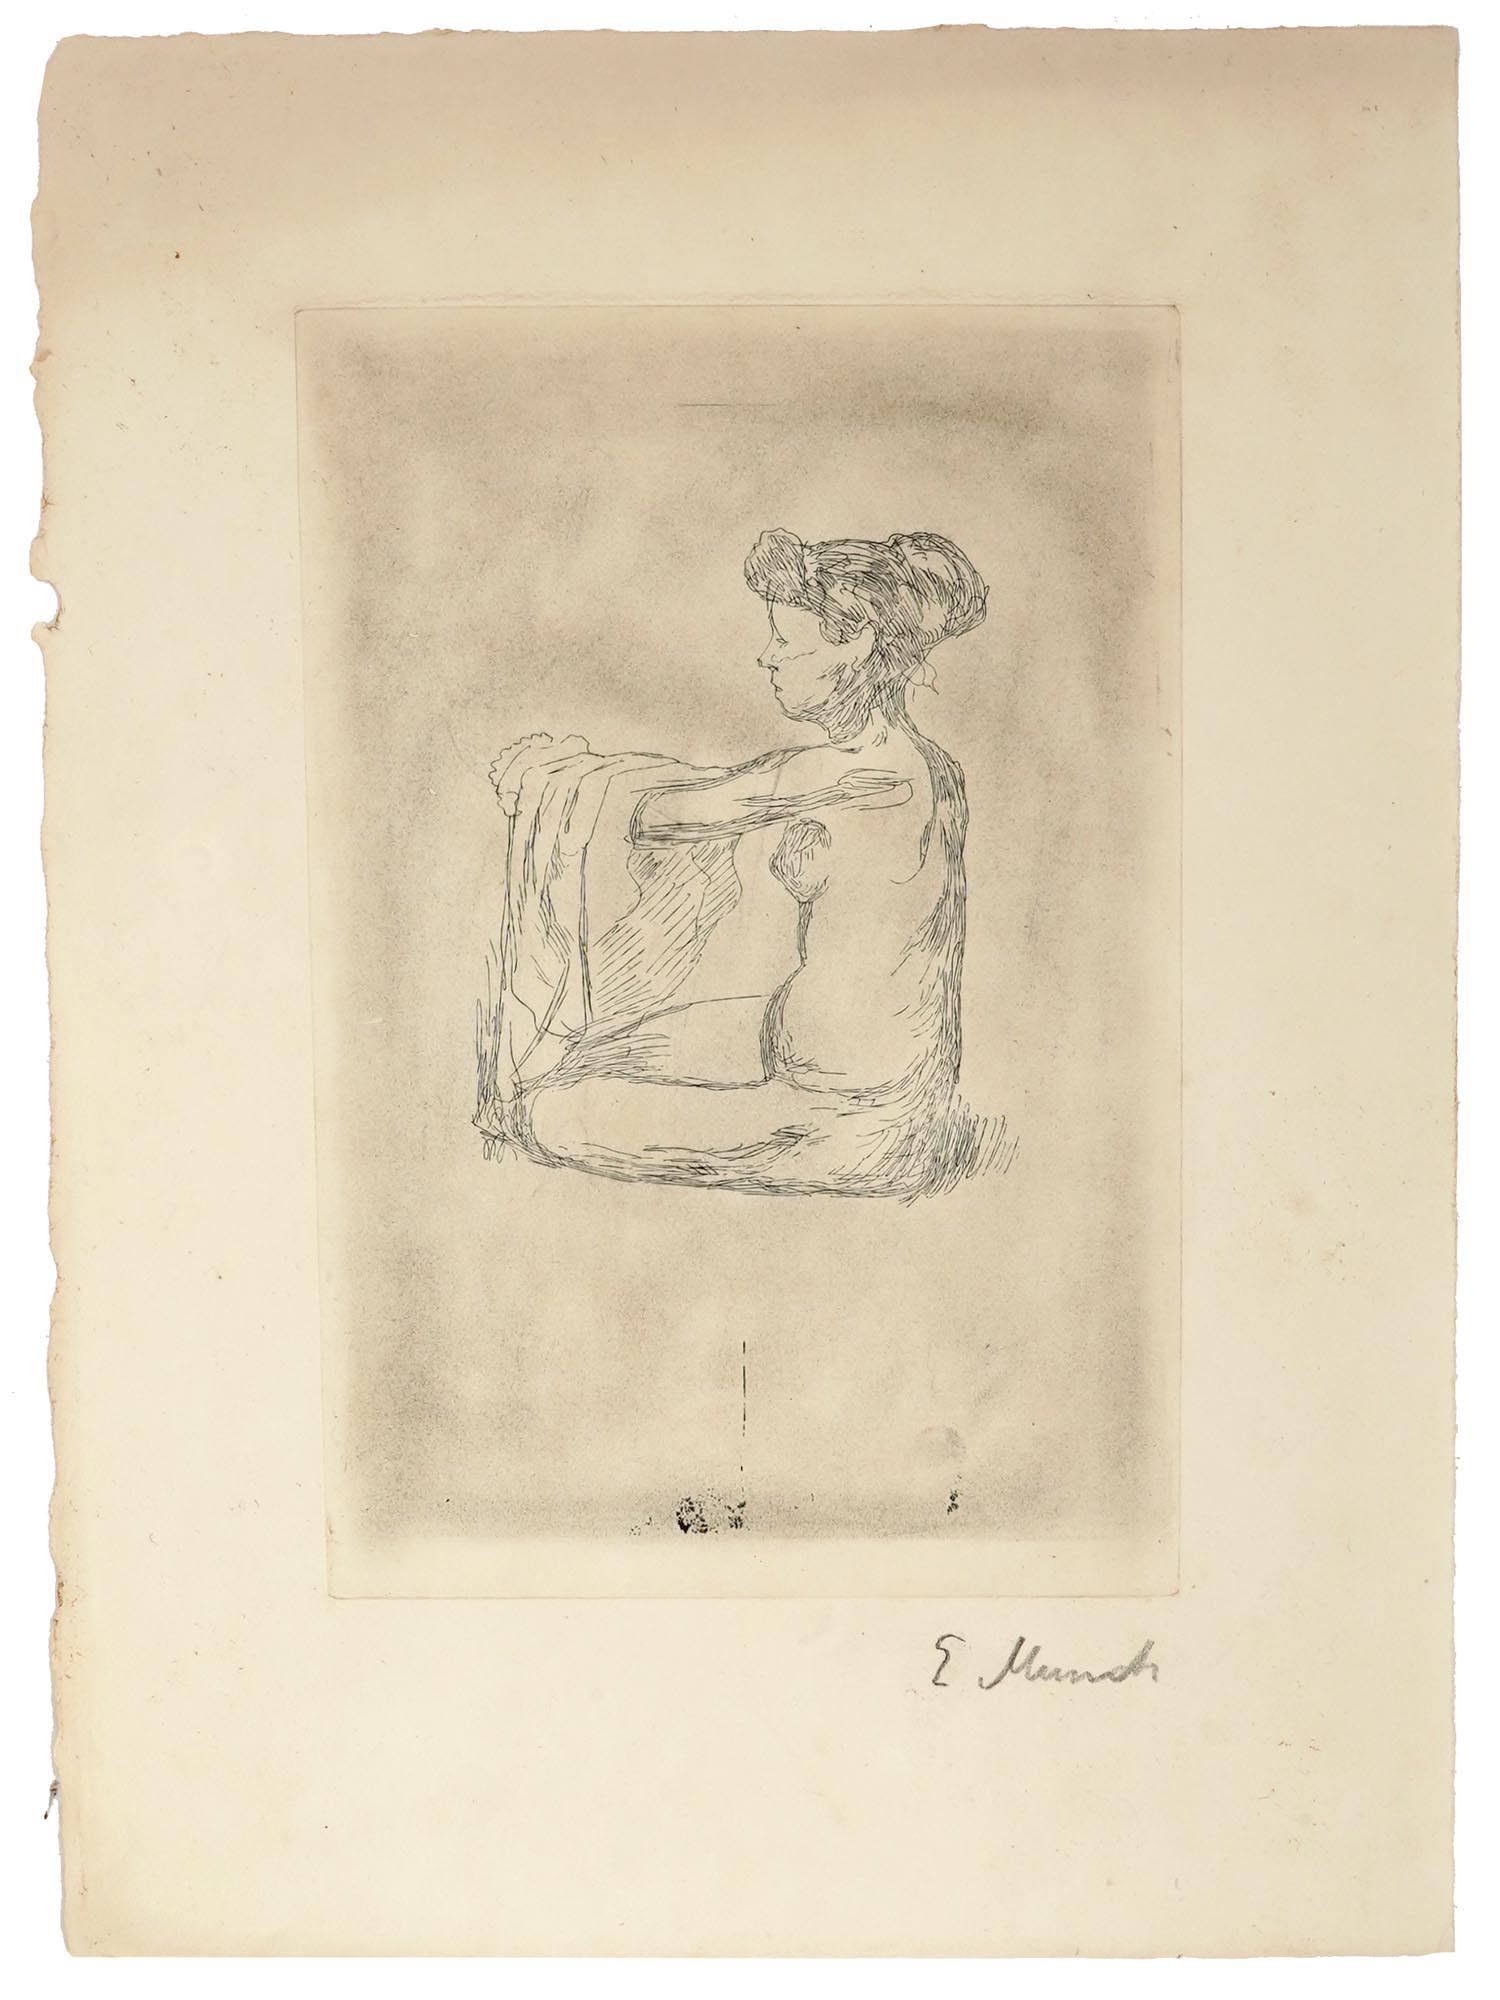 SIGNED DRYPOINT ETCHING PRINT BY EDVARD MUNCH 1896 PIC-0